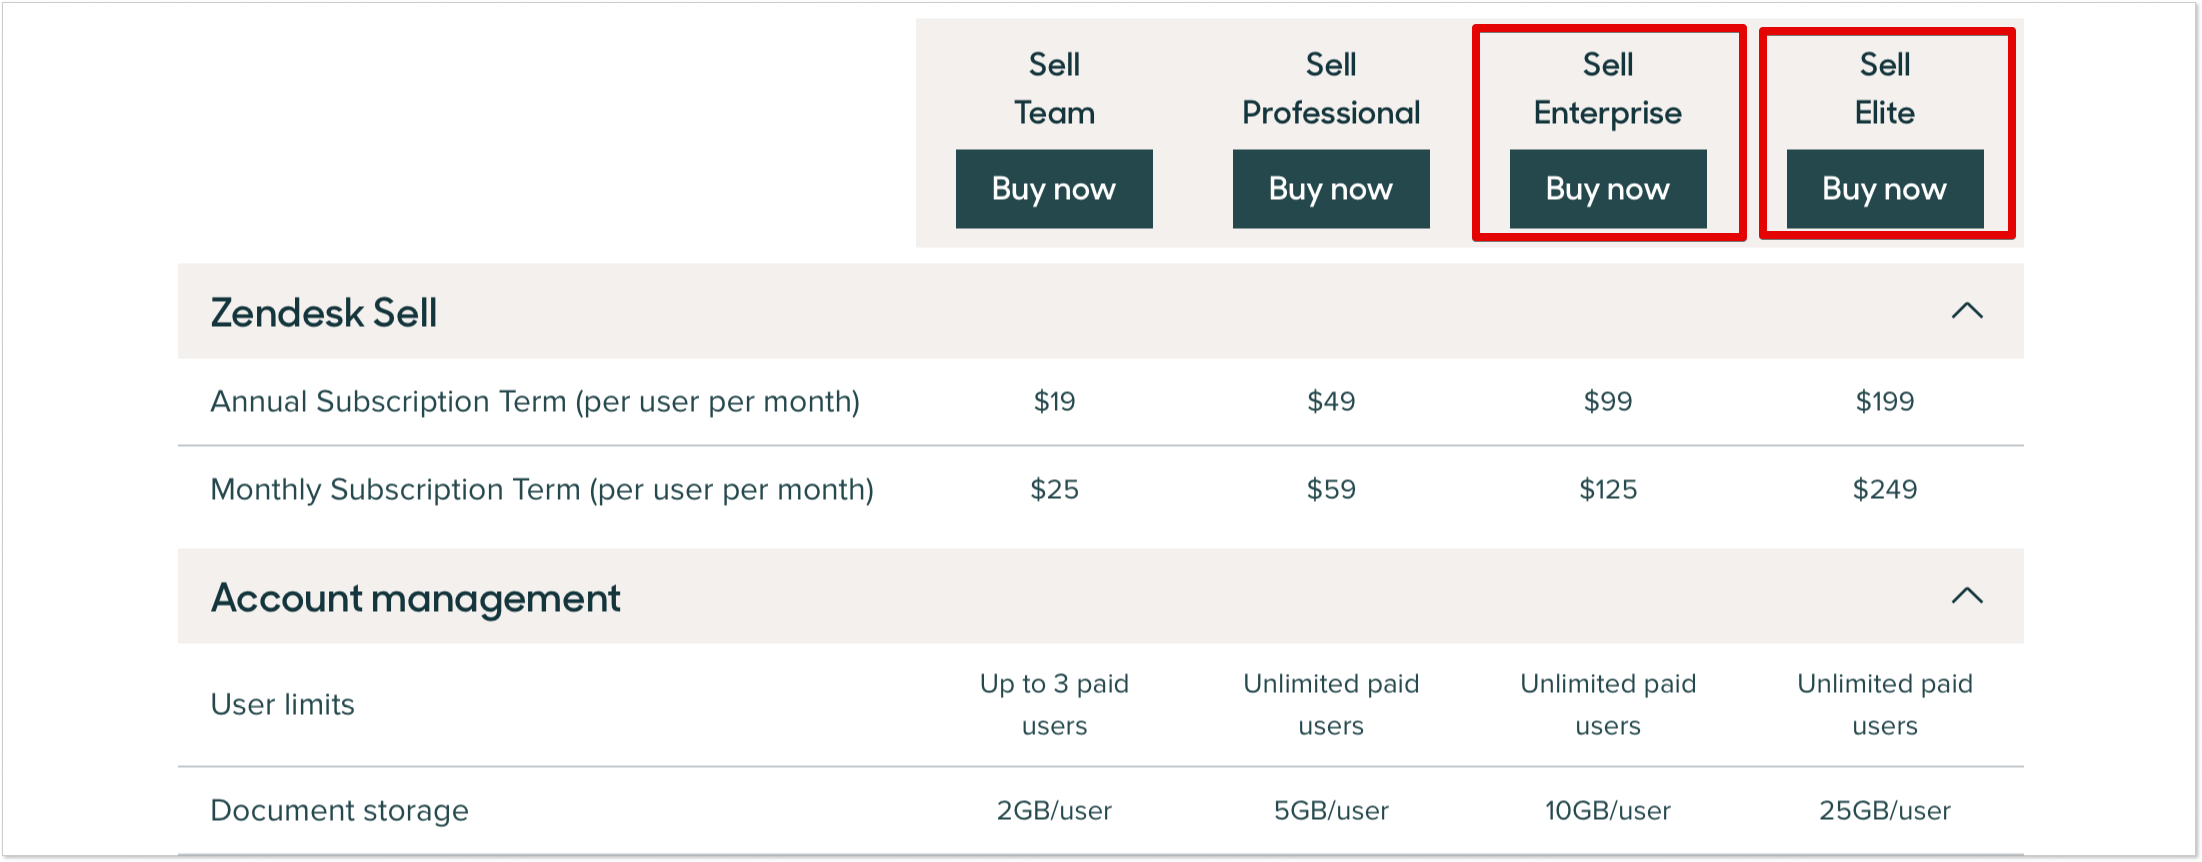 Zendesk Sell Enterprise and Sell Elite pricing 